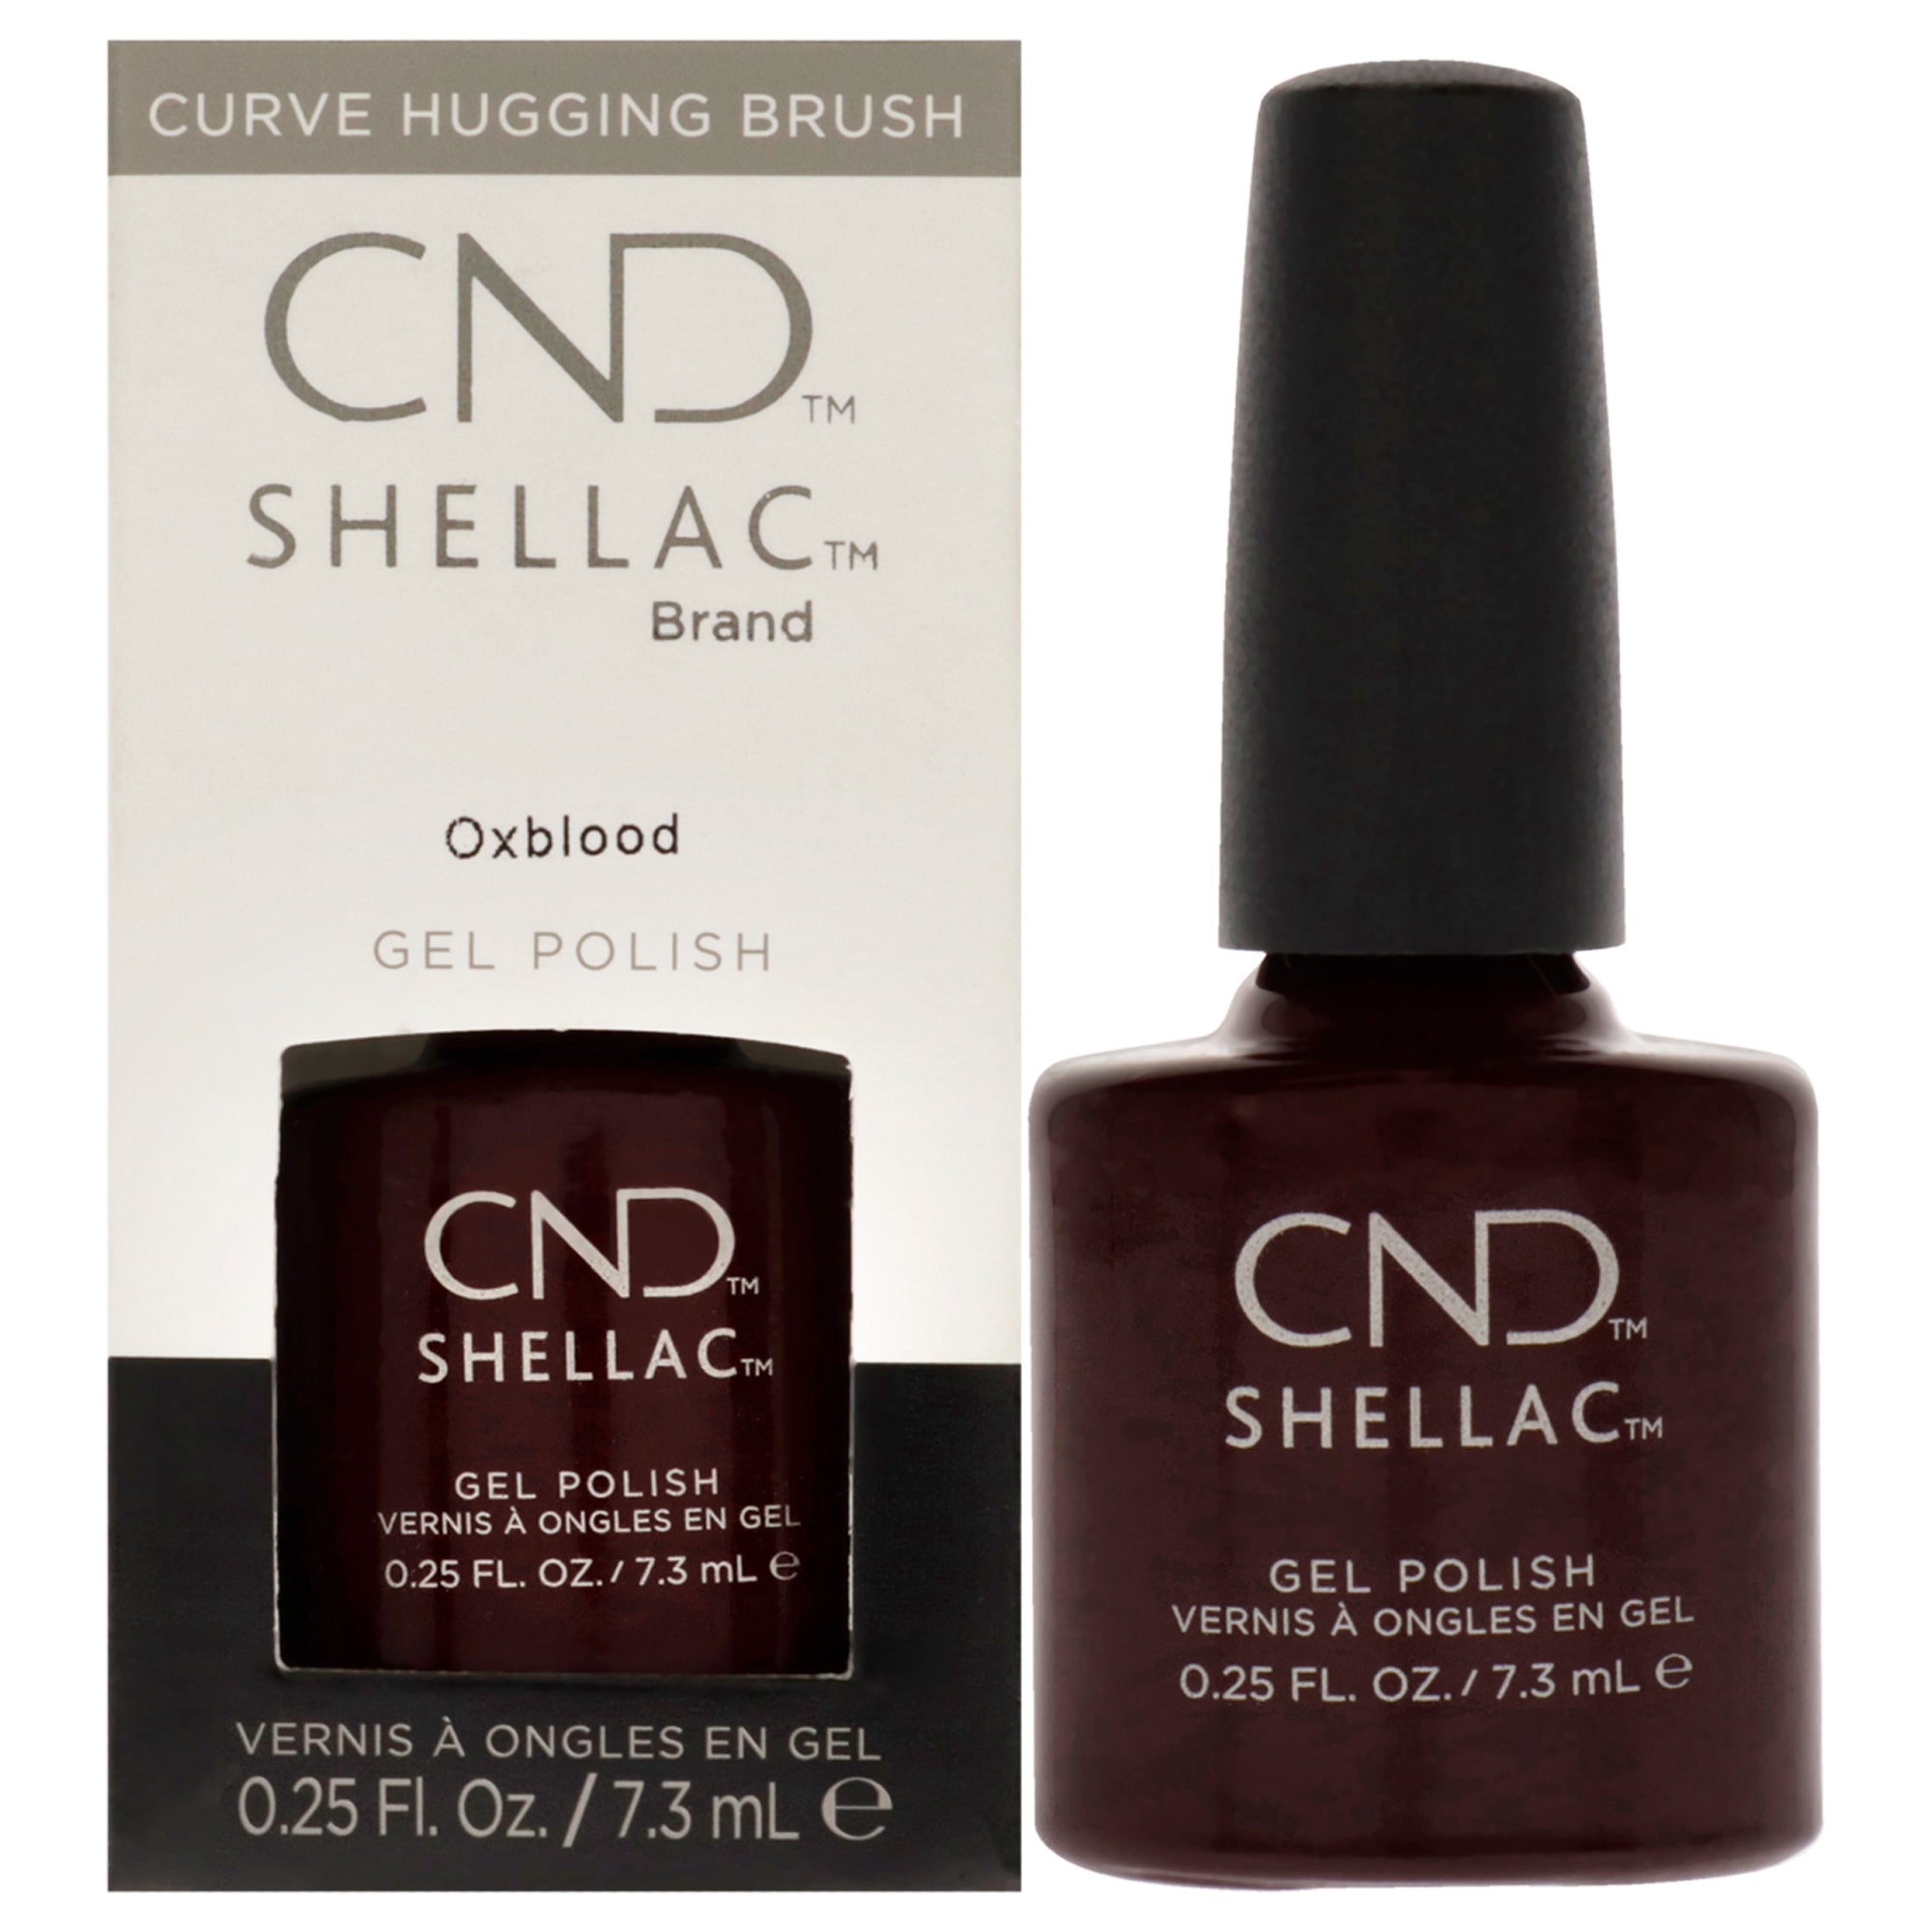 Shellac Nail Color - Oxblood by CND for Women - 0.25 oz Nail Polish